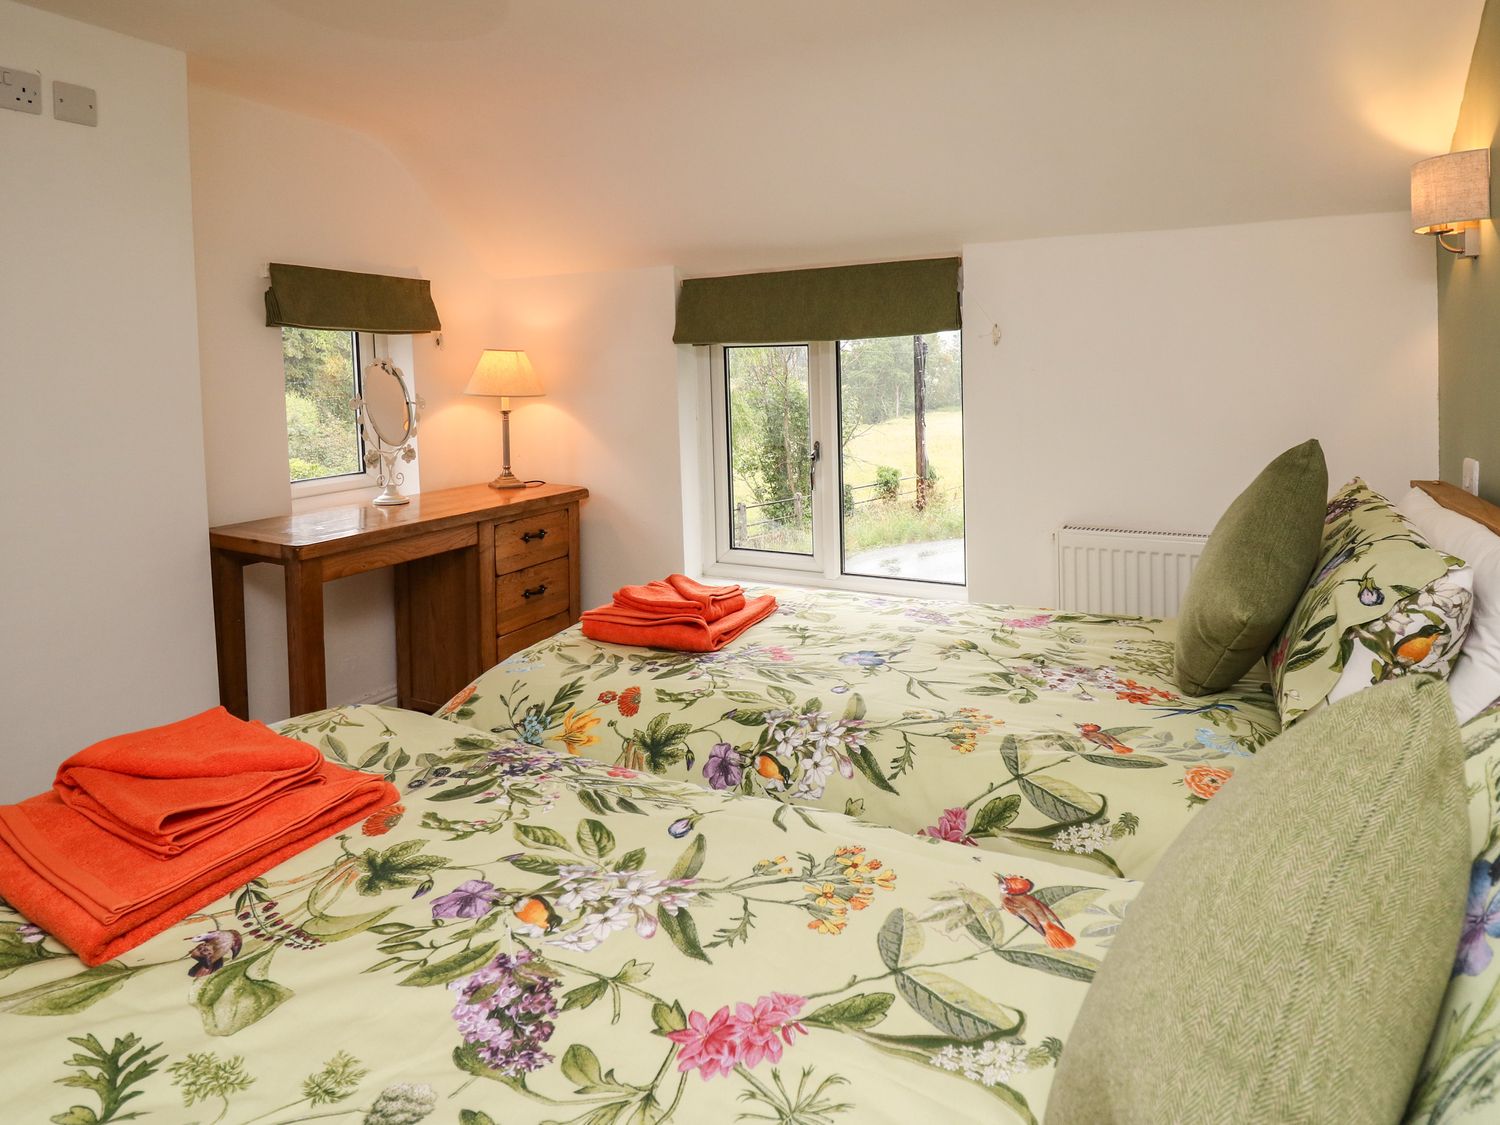 Min Y Nant is near Llangadfan, Powys. Three-bedroom cottage with riverside views. Wood-fired hot tub